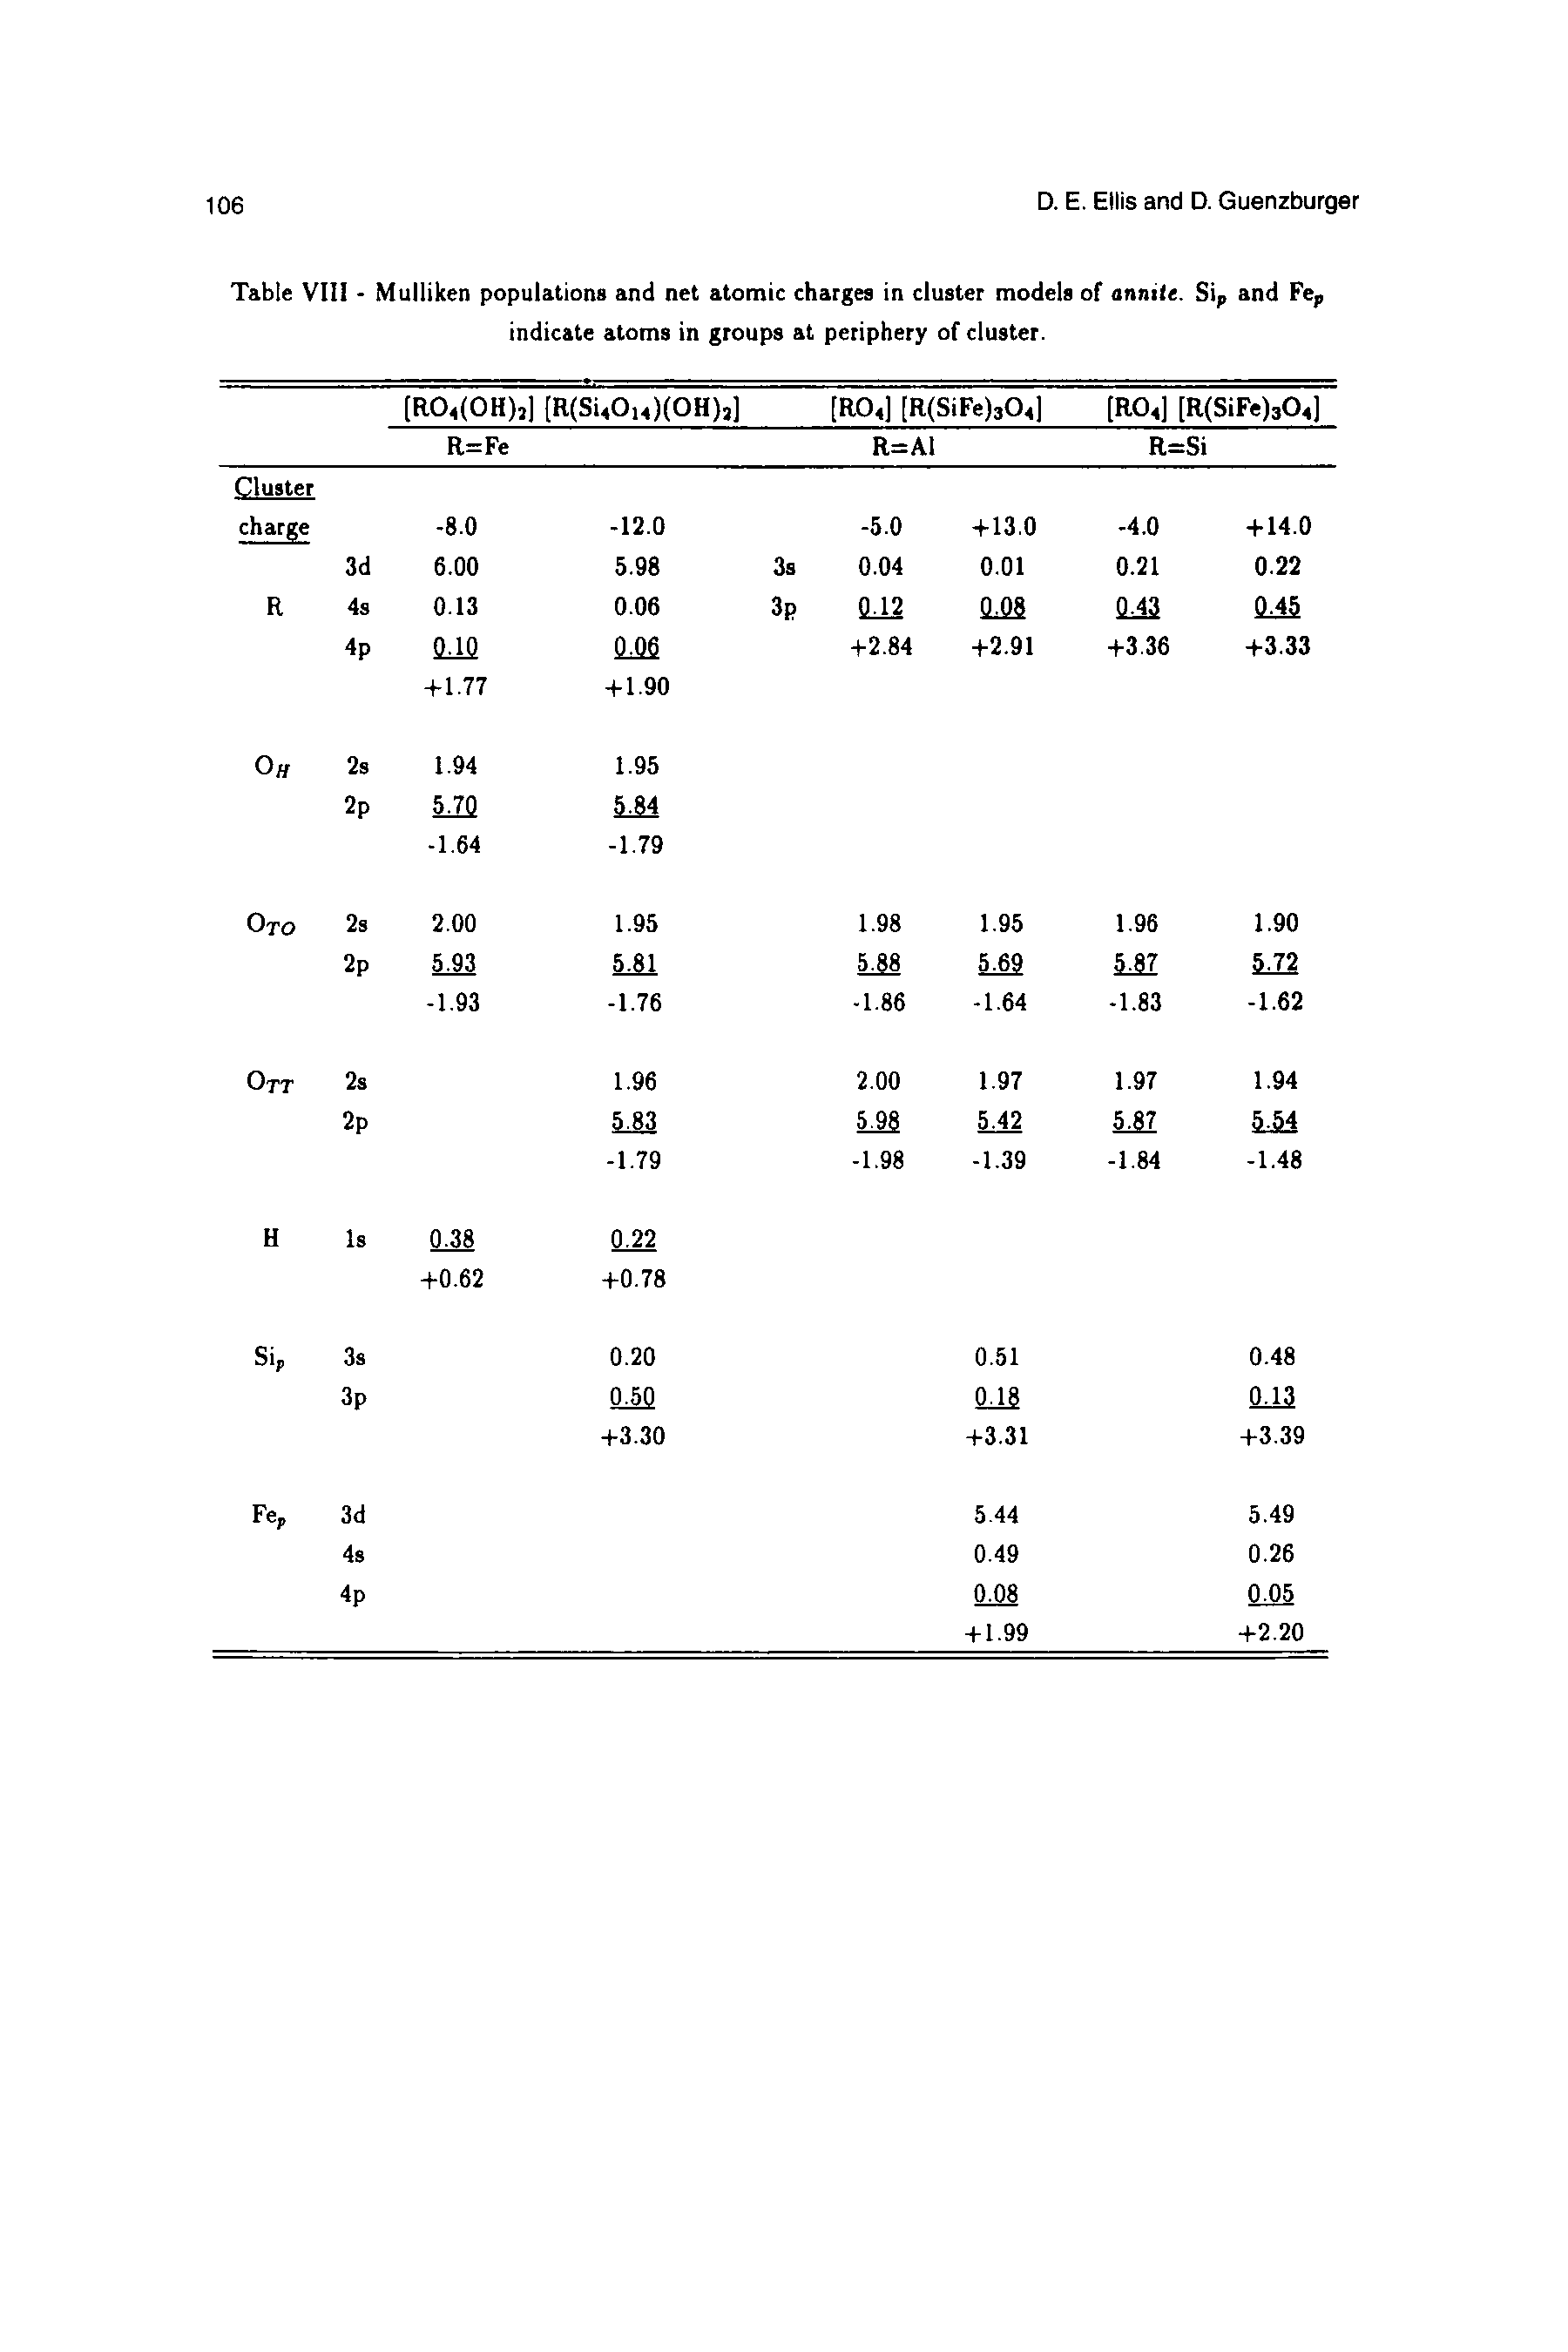 Table VII Mulliken populations and net atomic charges in cluster models of annite. Sip and Fep indicate atoms in groups at periphery of cluster.